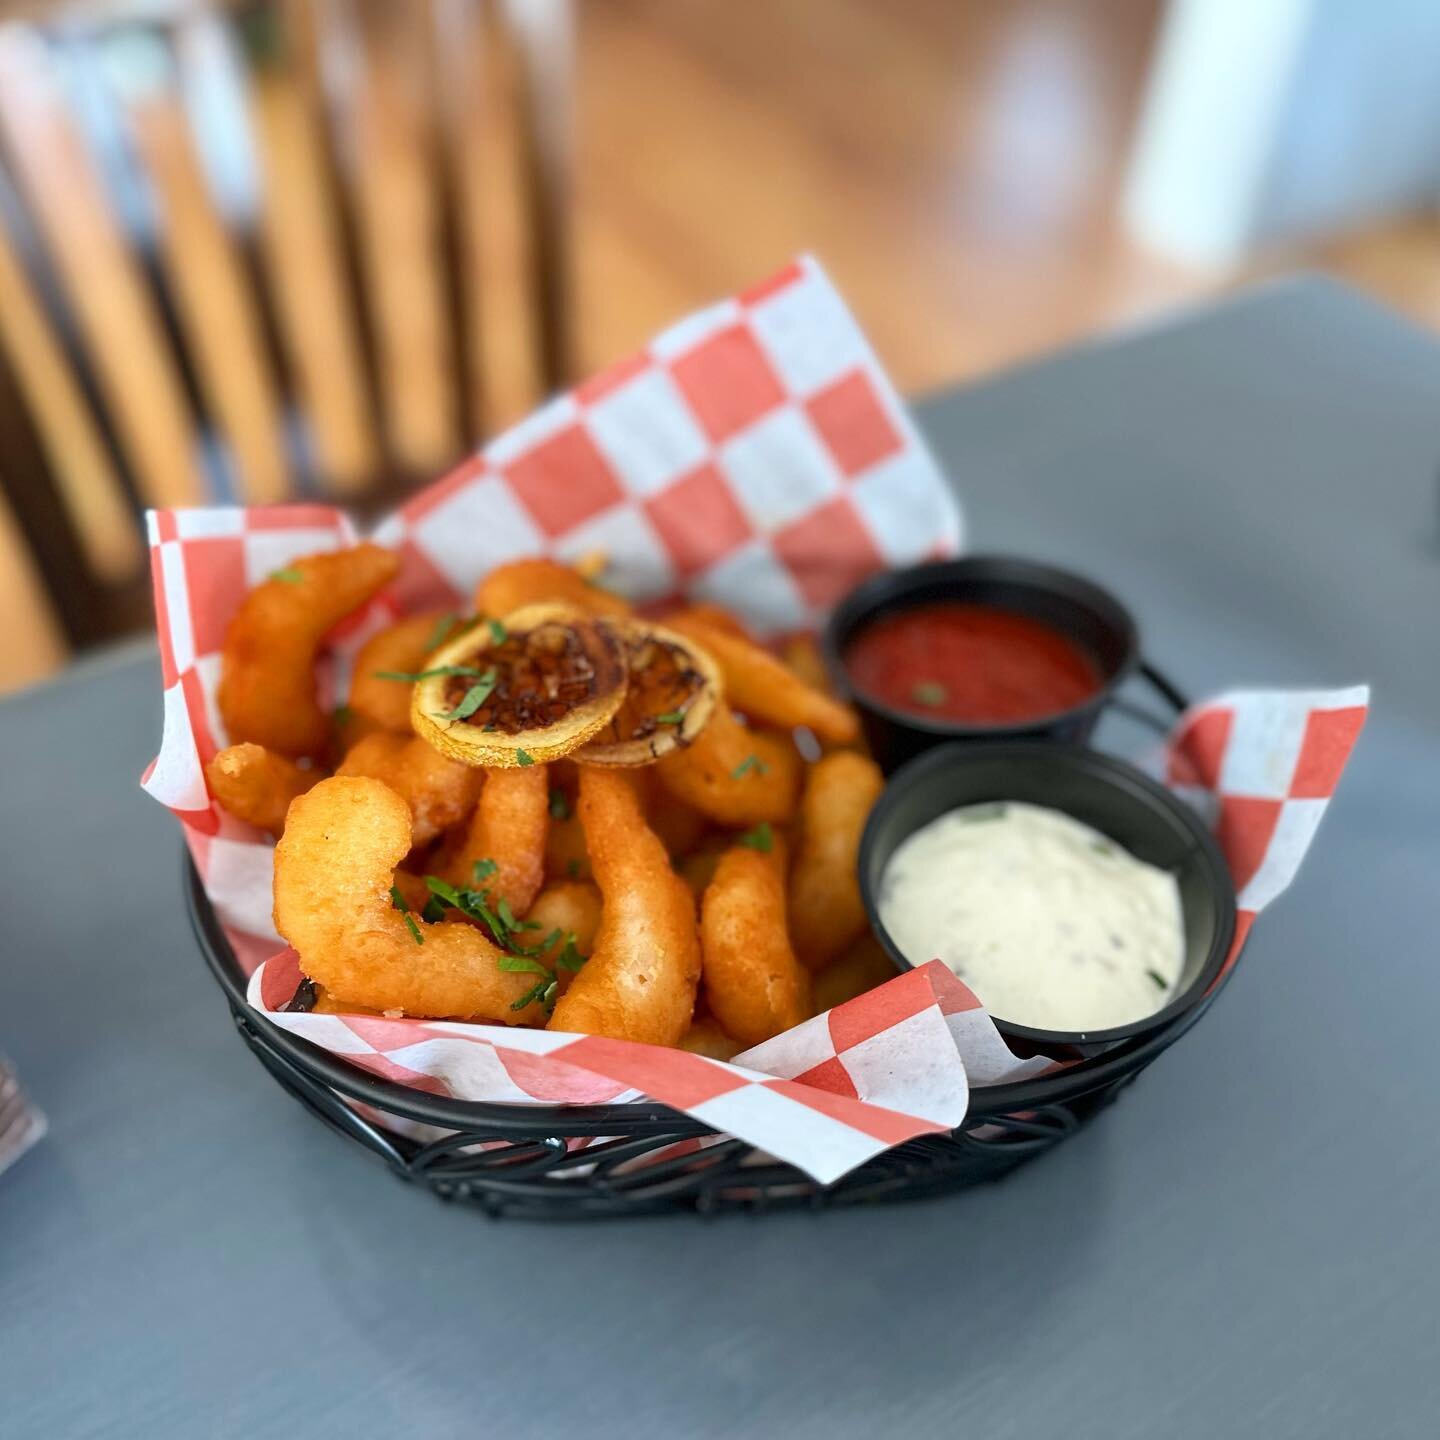 Our shrimp basket is perfect for lunch OR dinner! 🍤

Let us know your fav order at Fins and Forks so far in the comments 👇👇

#hamptonbays #thehamptons #suffolkcounty #longislandlife #longislandfoodie #southampton #friedshrimp #freshseafood #hampto